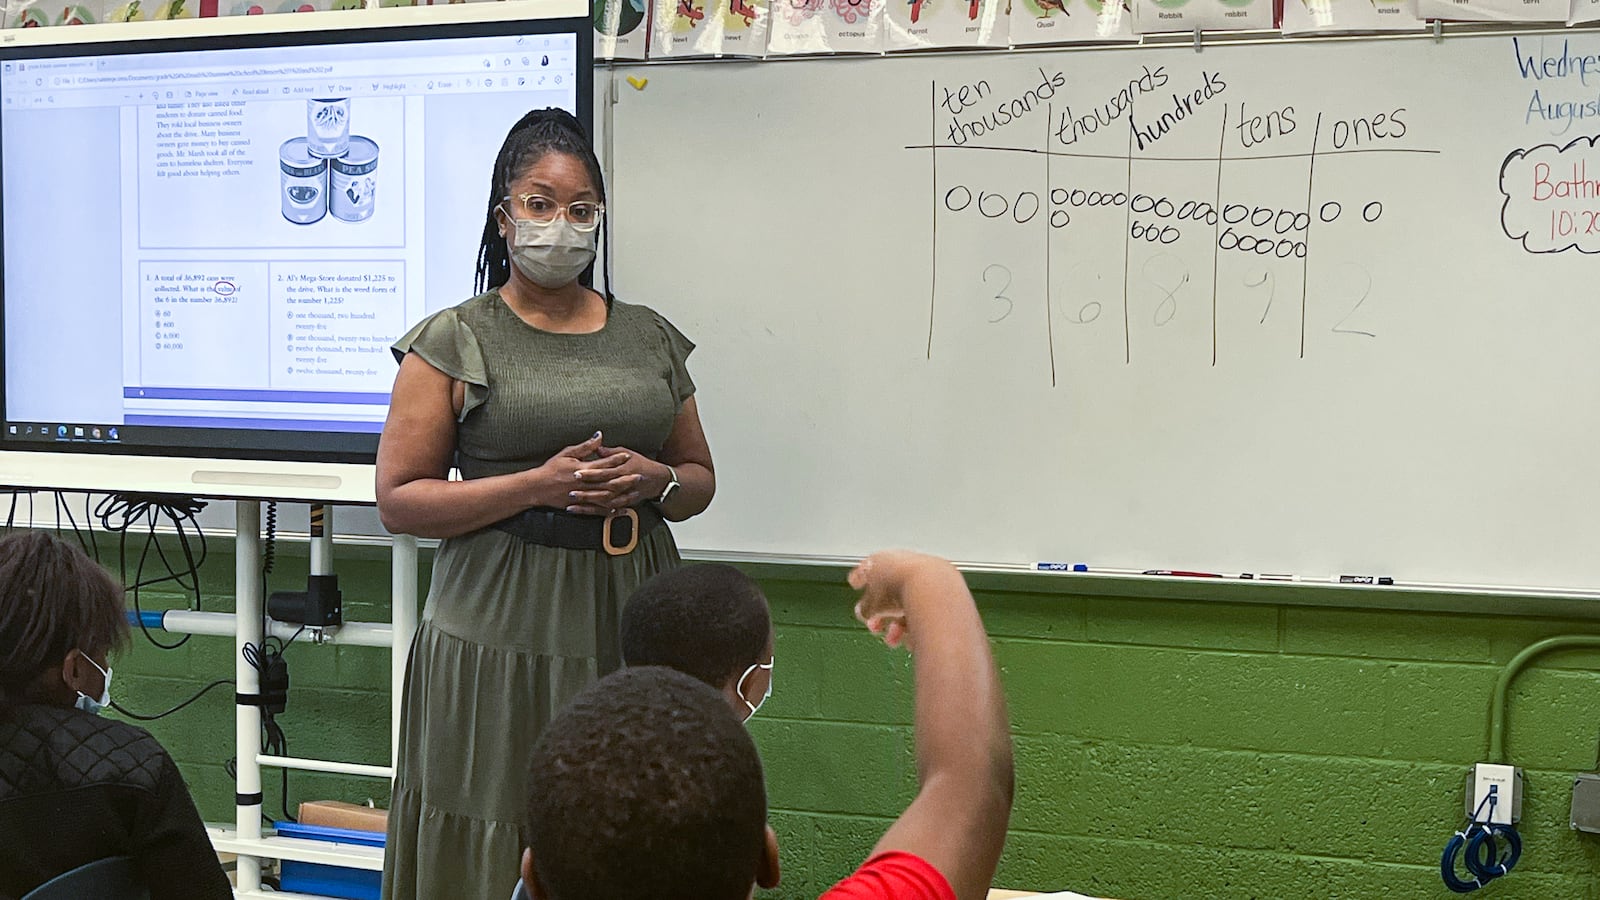 A teacher wearing a mask stands at the front of a classroom in front of a whiteboard that shows mathematical principles. In the foreground, a student in a red shirt has his hand raised.